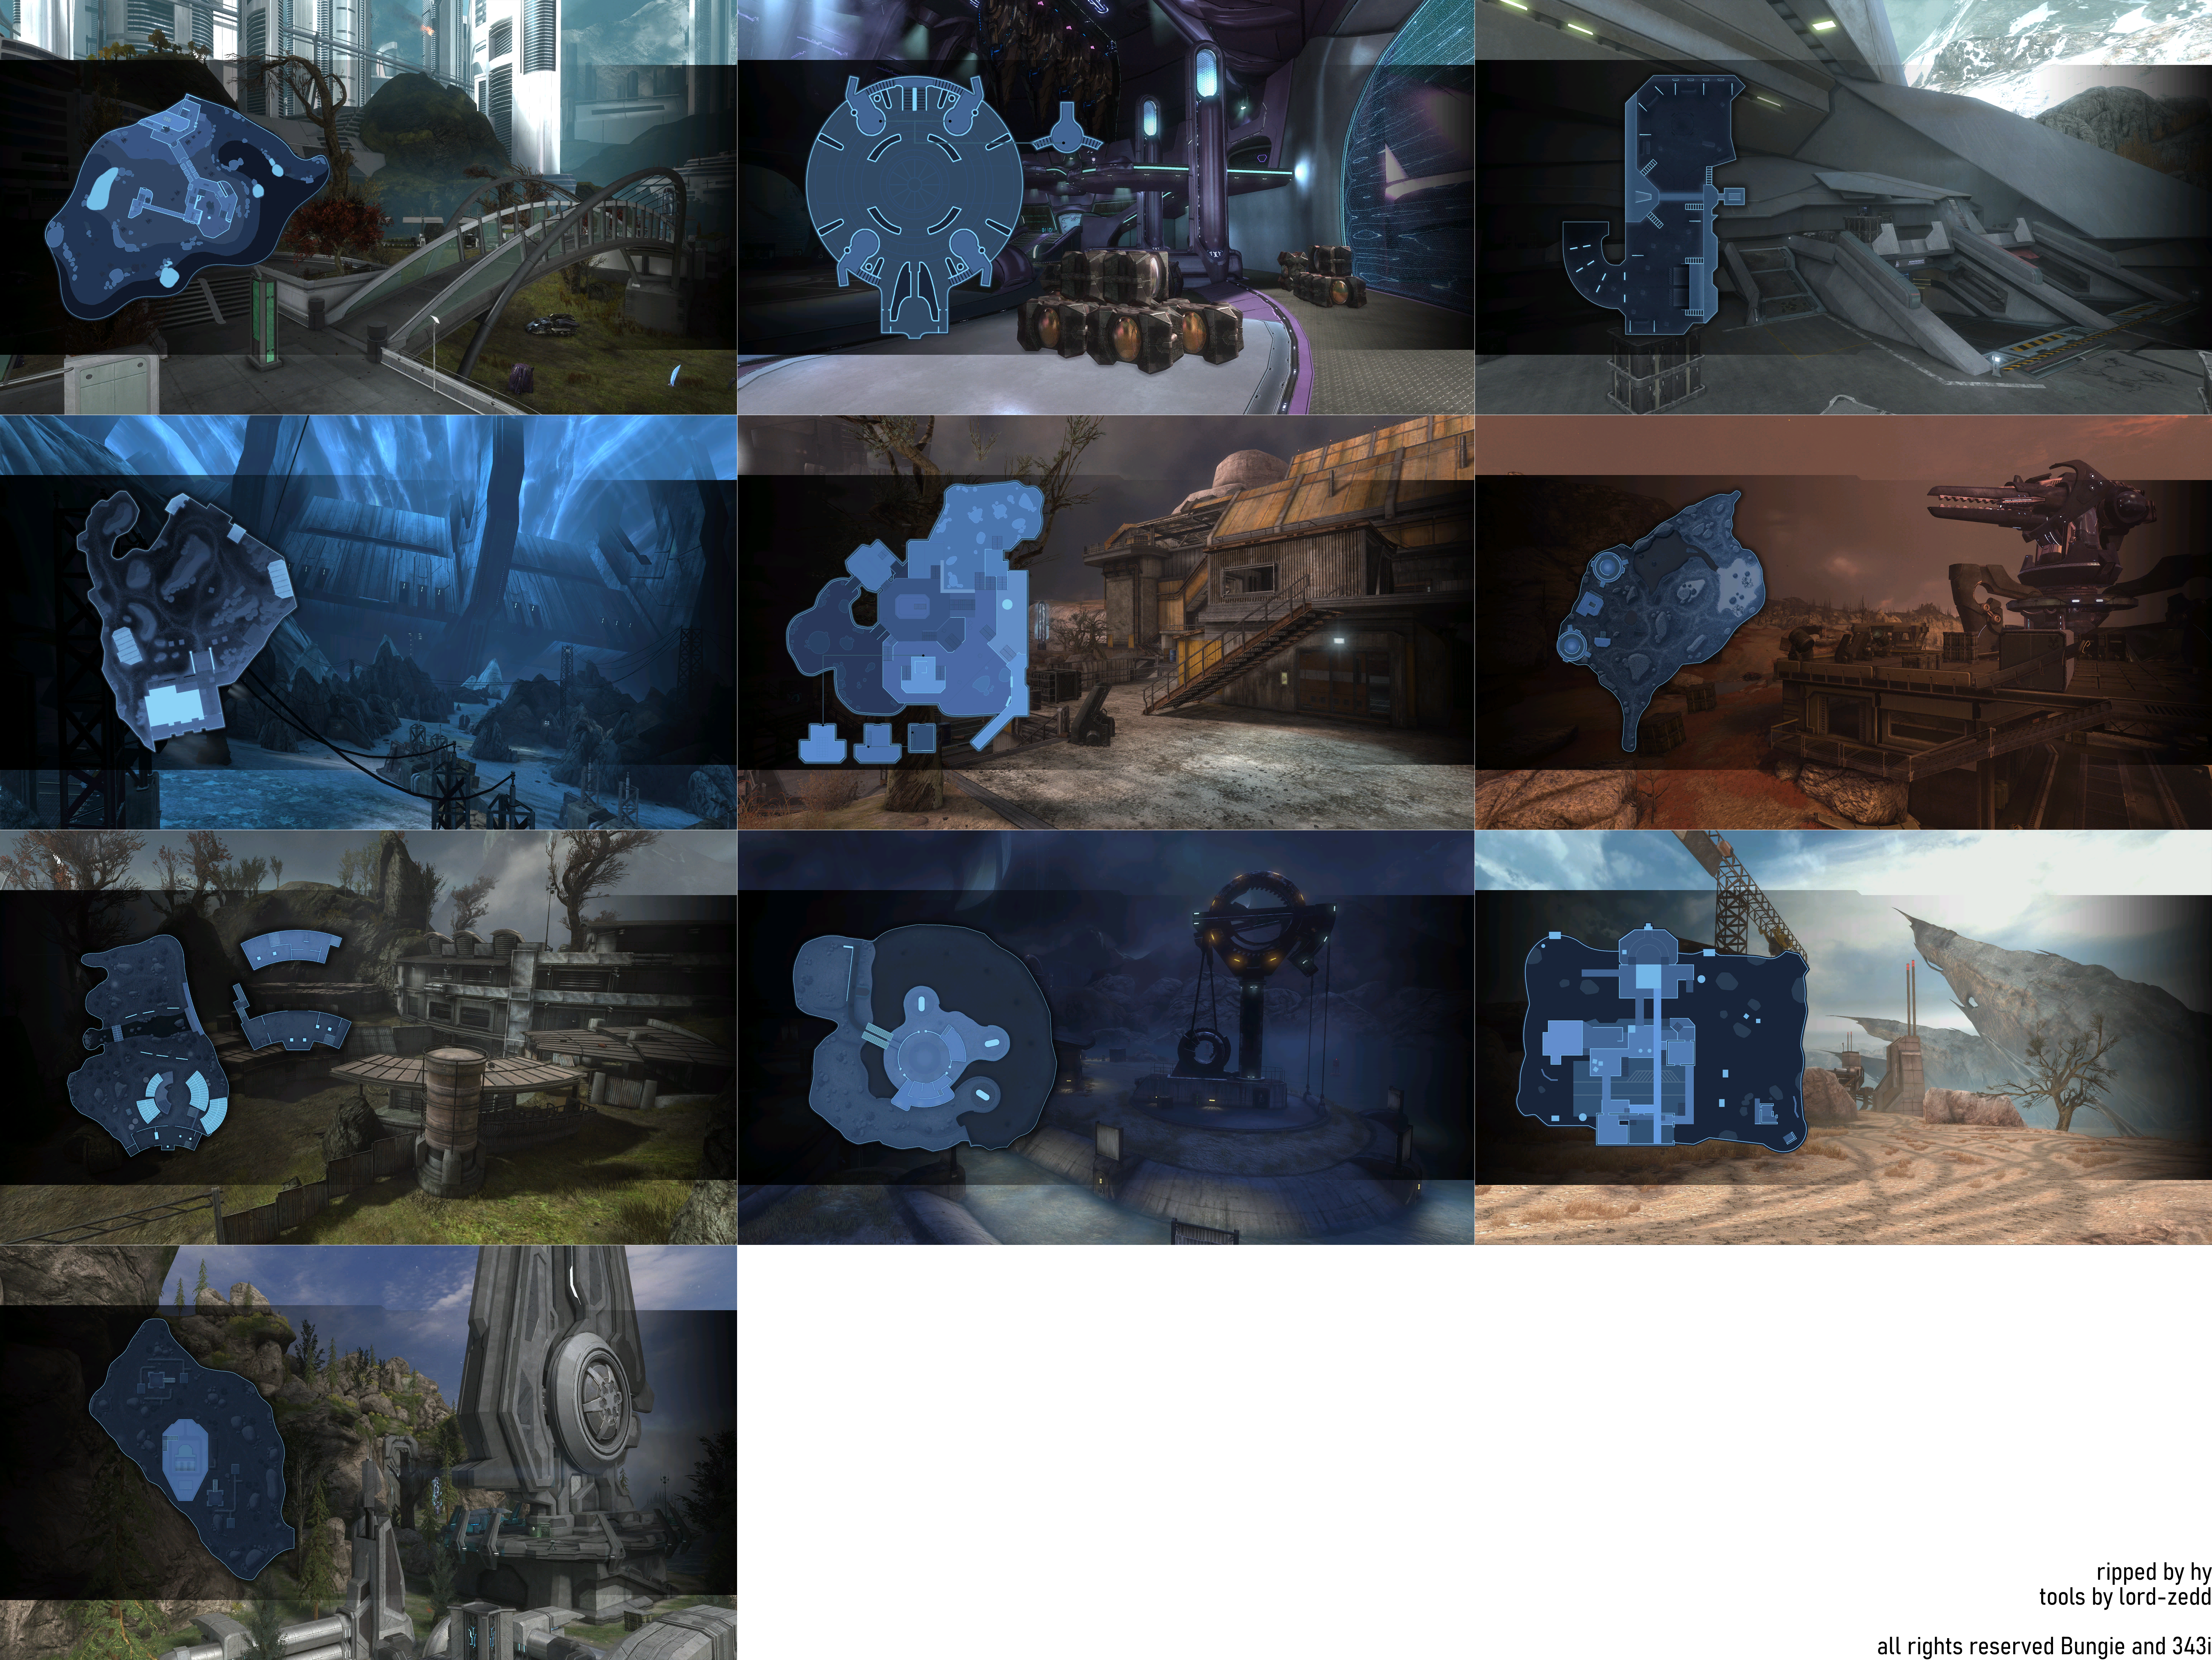 Halo: The Master Chief Collection - Halo: Reach Firefight Level Loading Screens